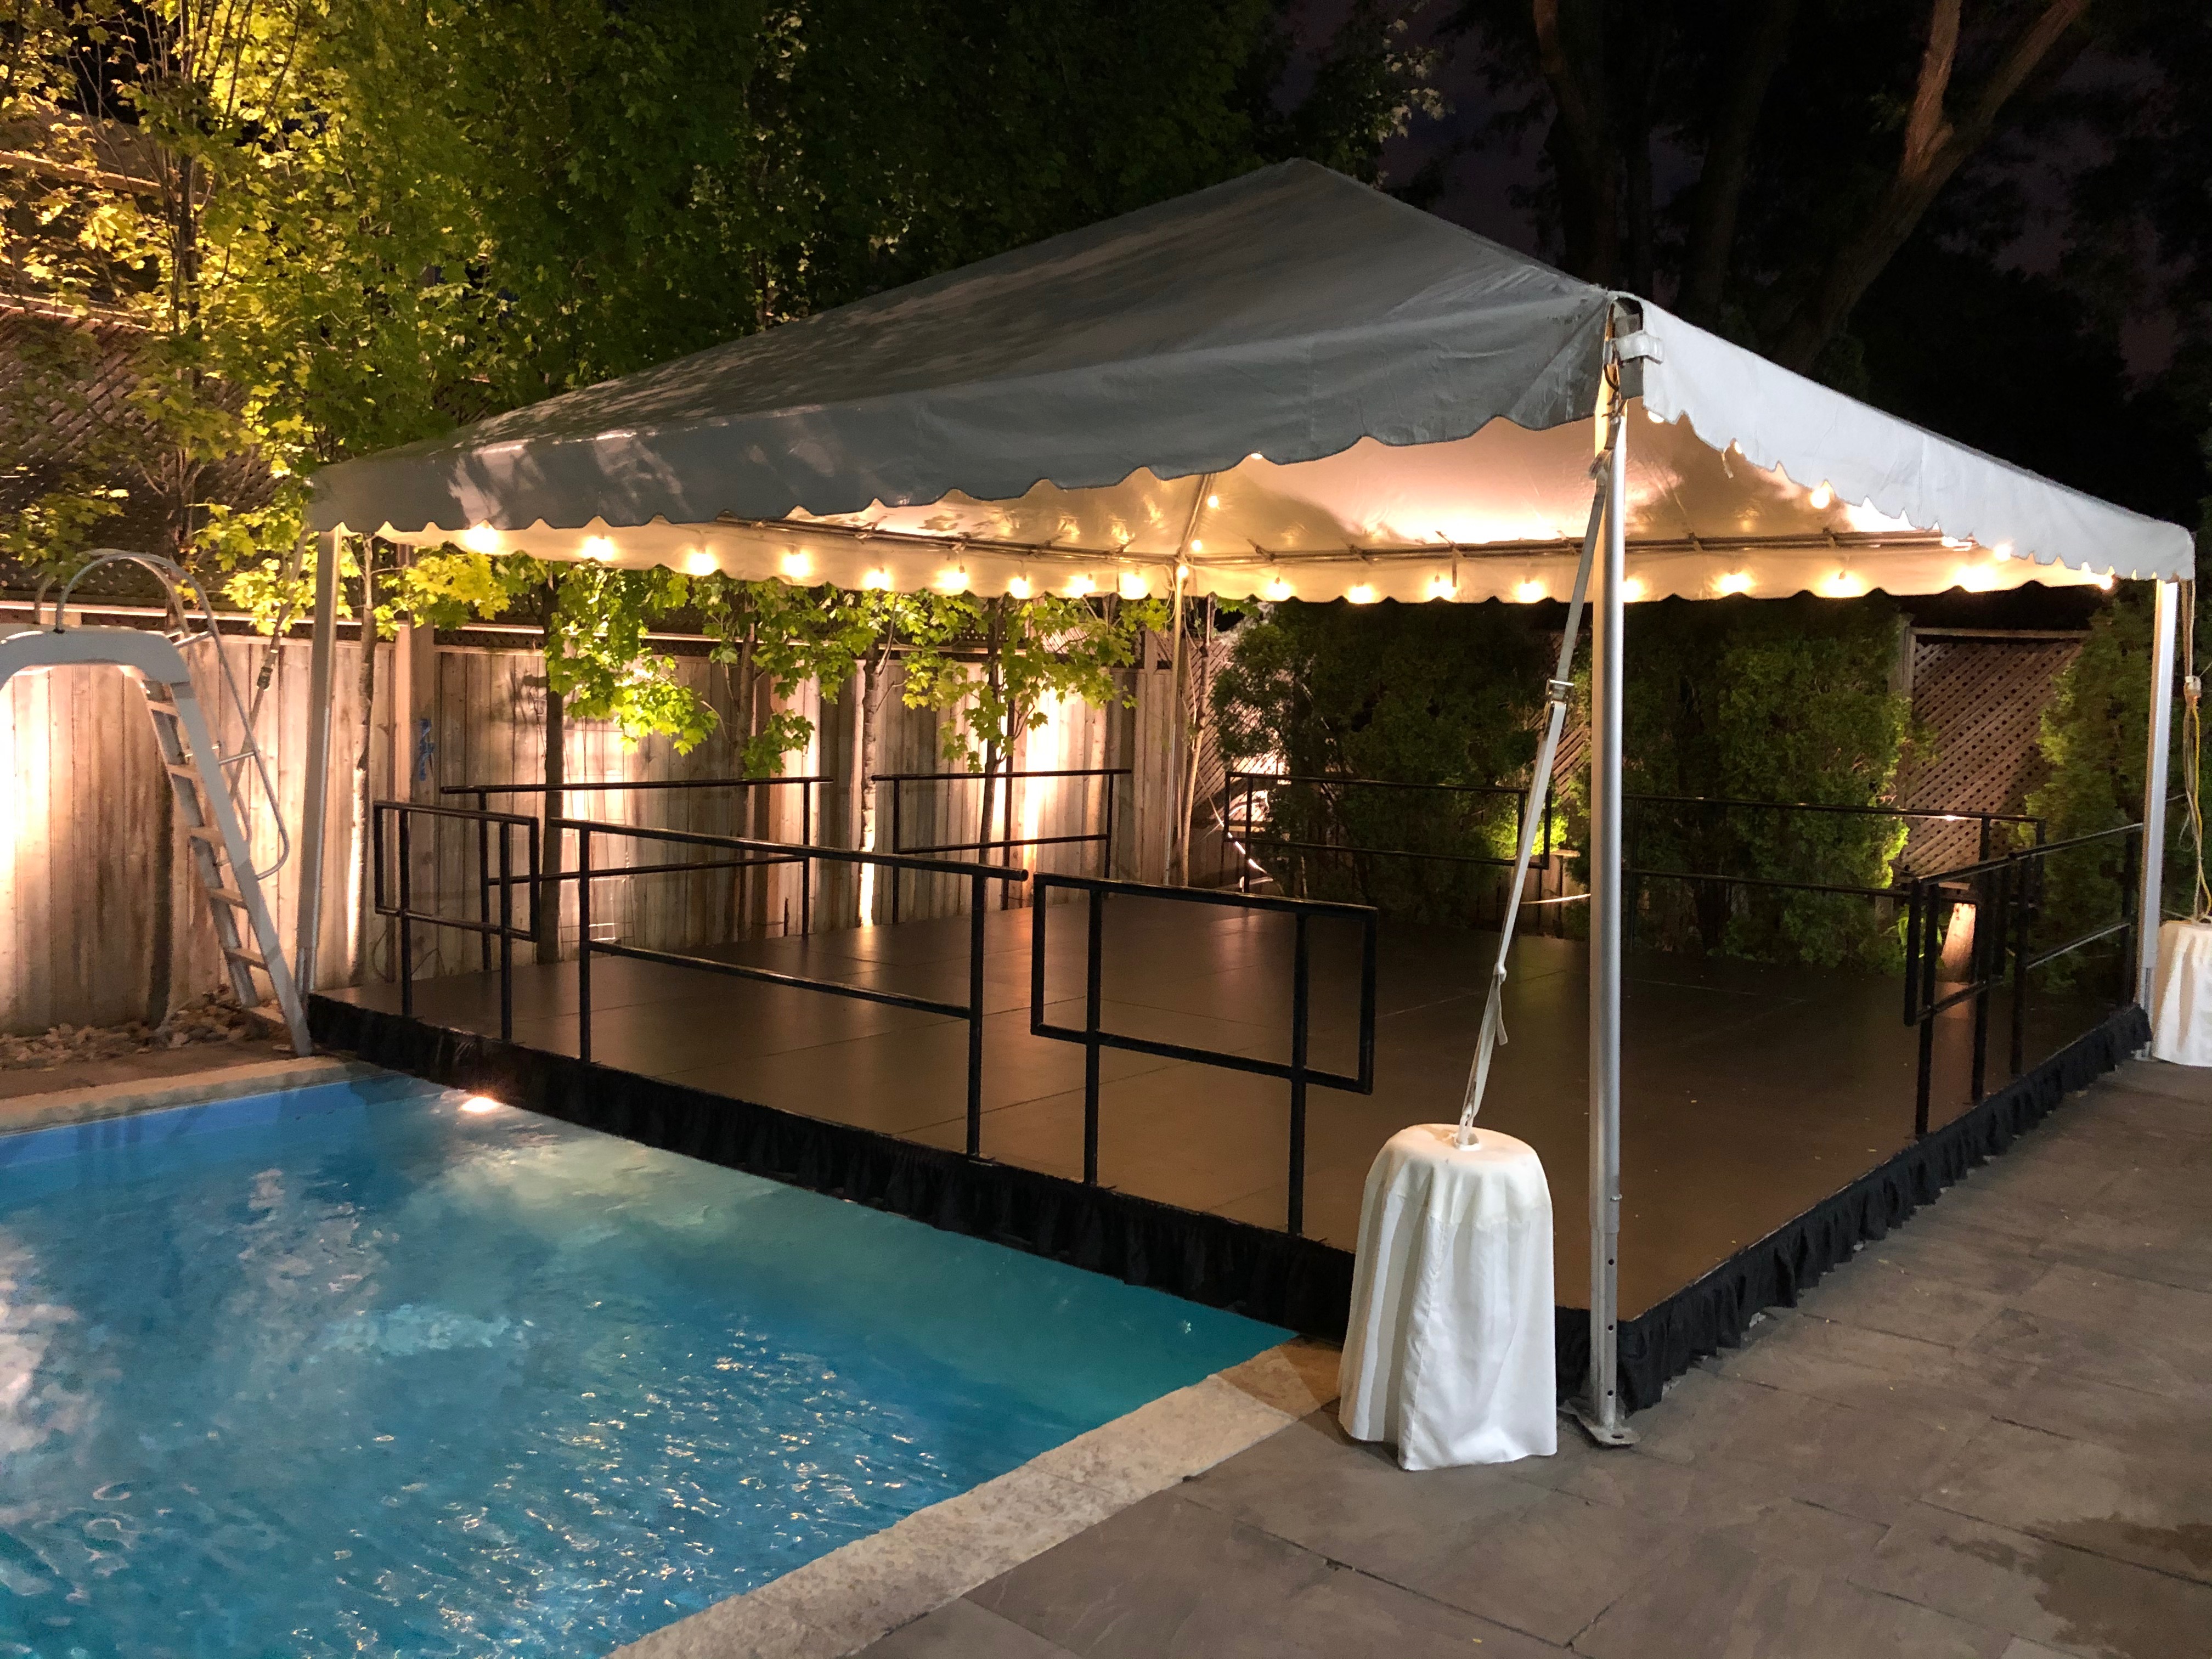 POOL COVERING PER SQUARE FOOT -Tent Separate Cost